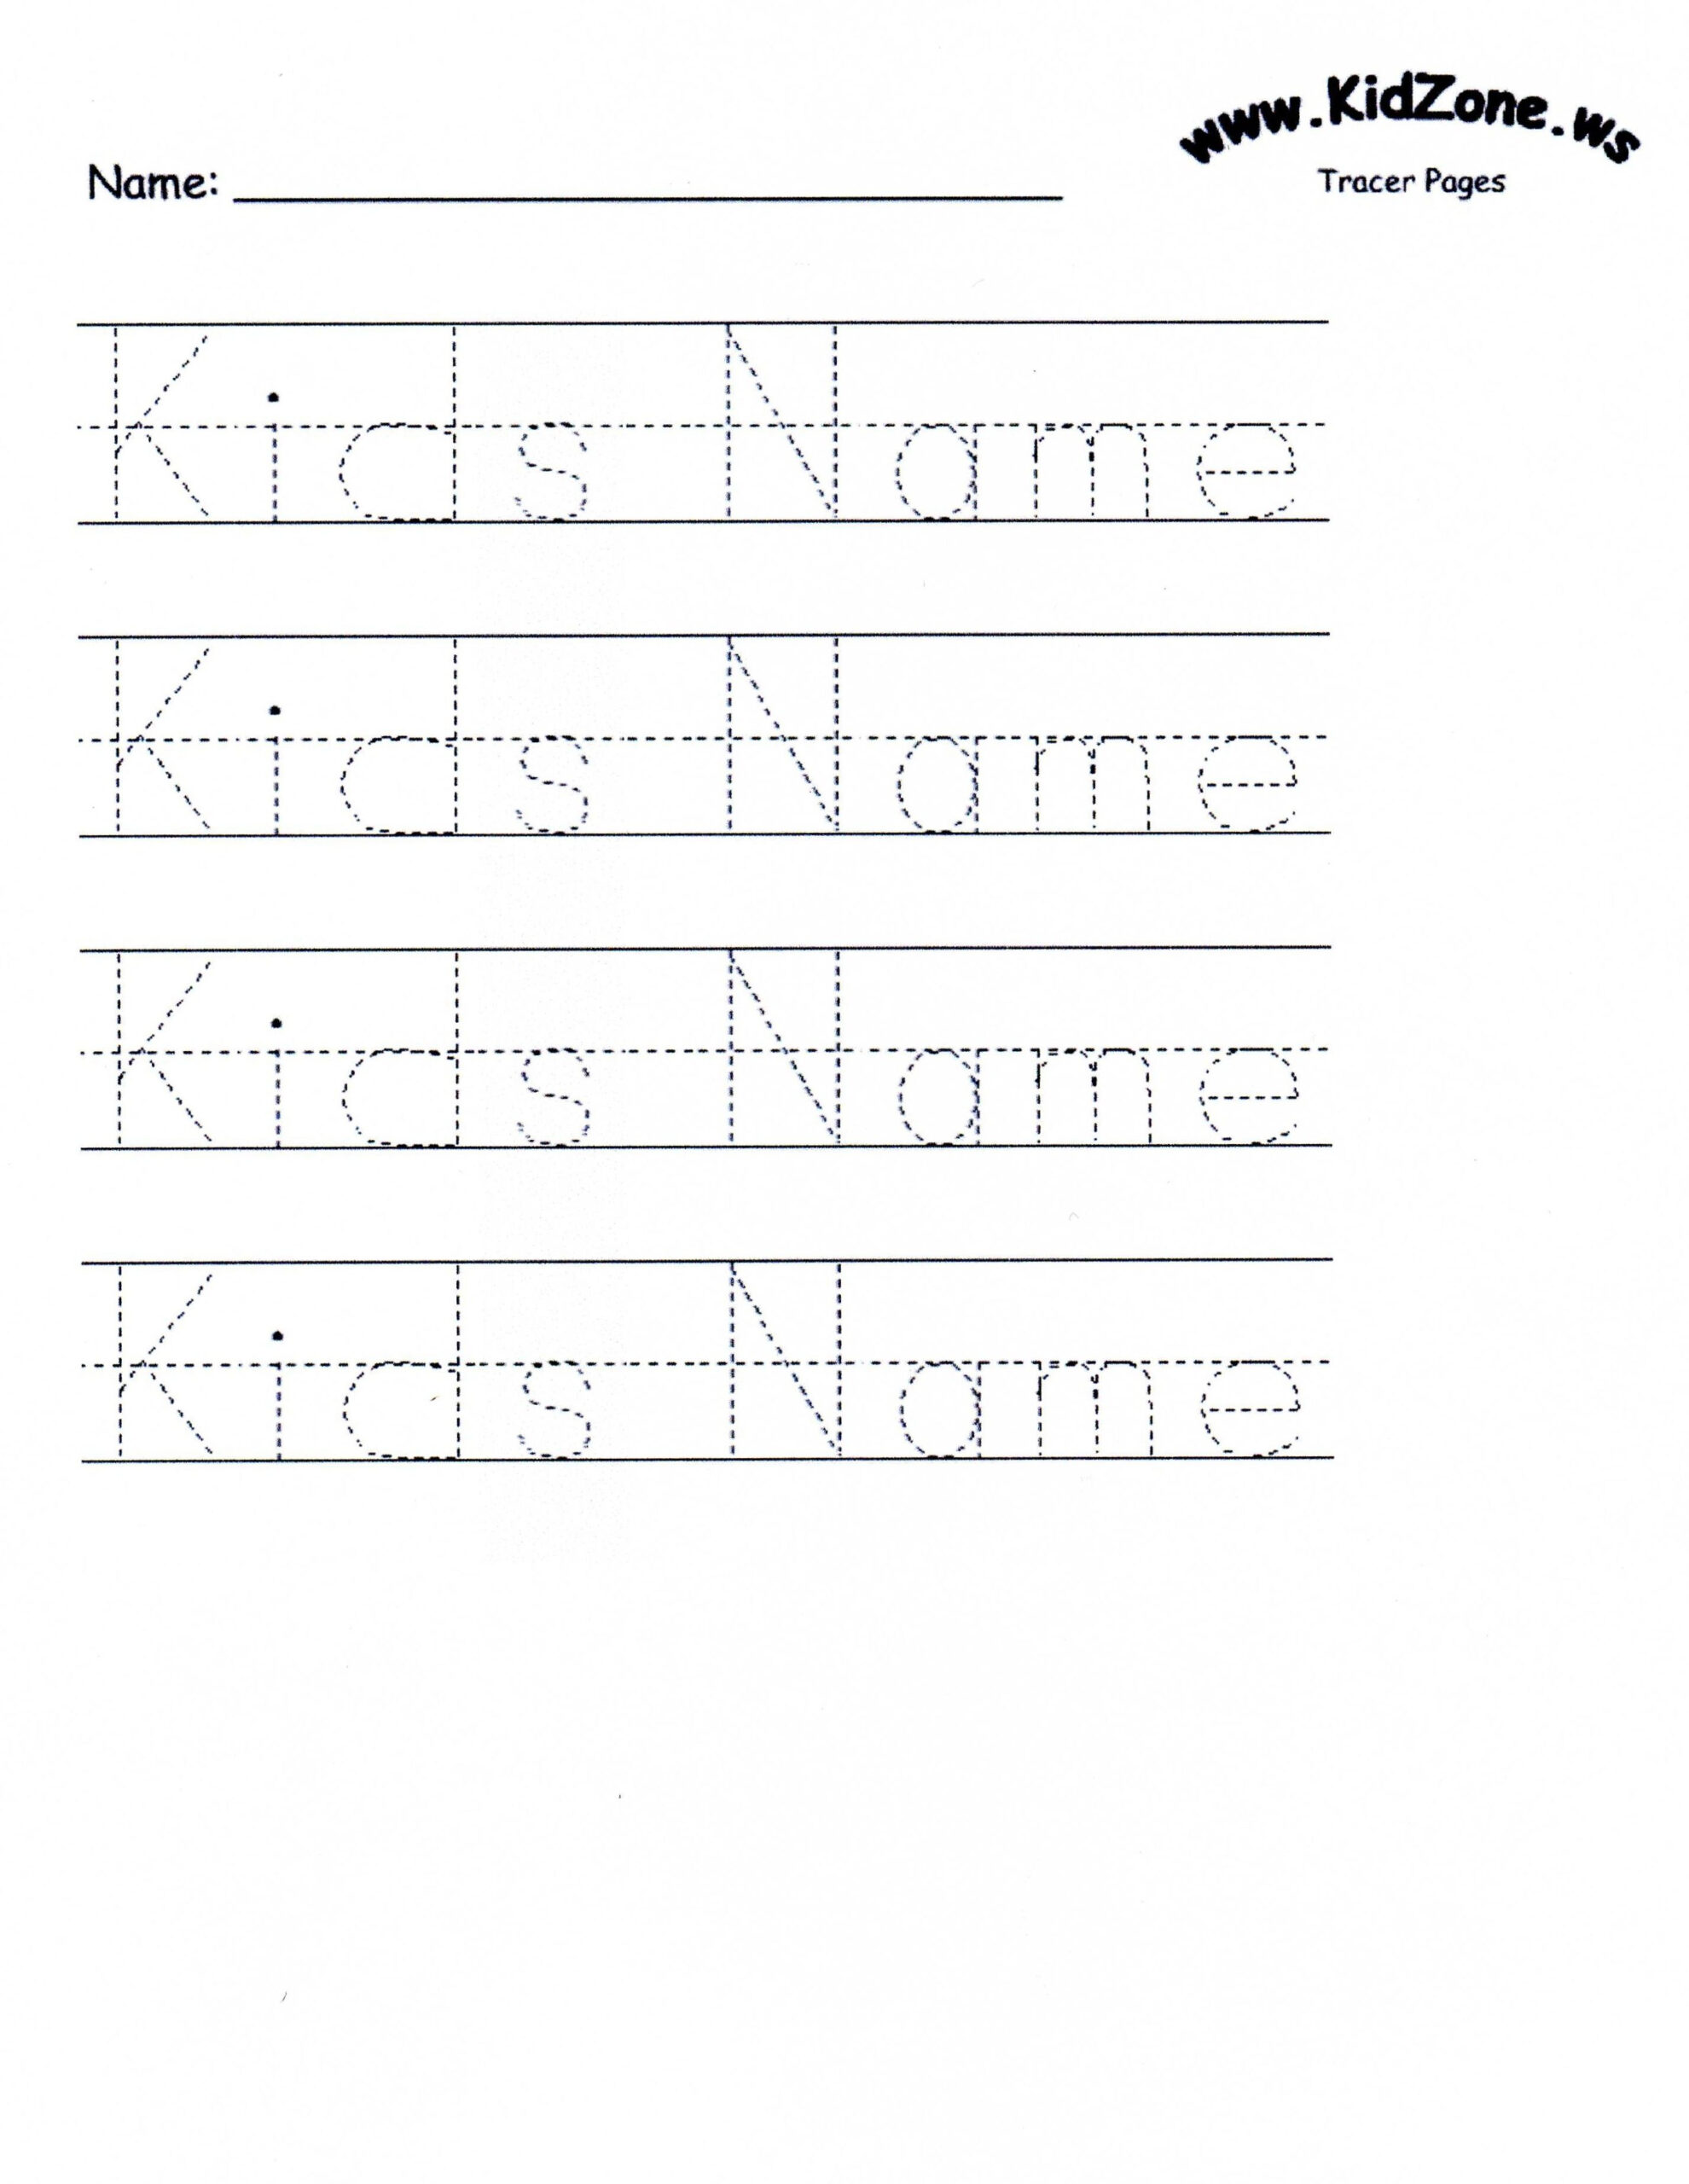 Custom Tracer Pages | Name Tracing Worksheets, Tracing with Name Tracing Personalized